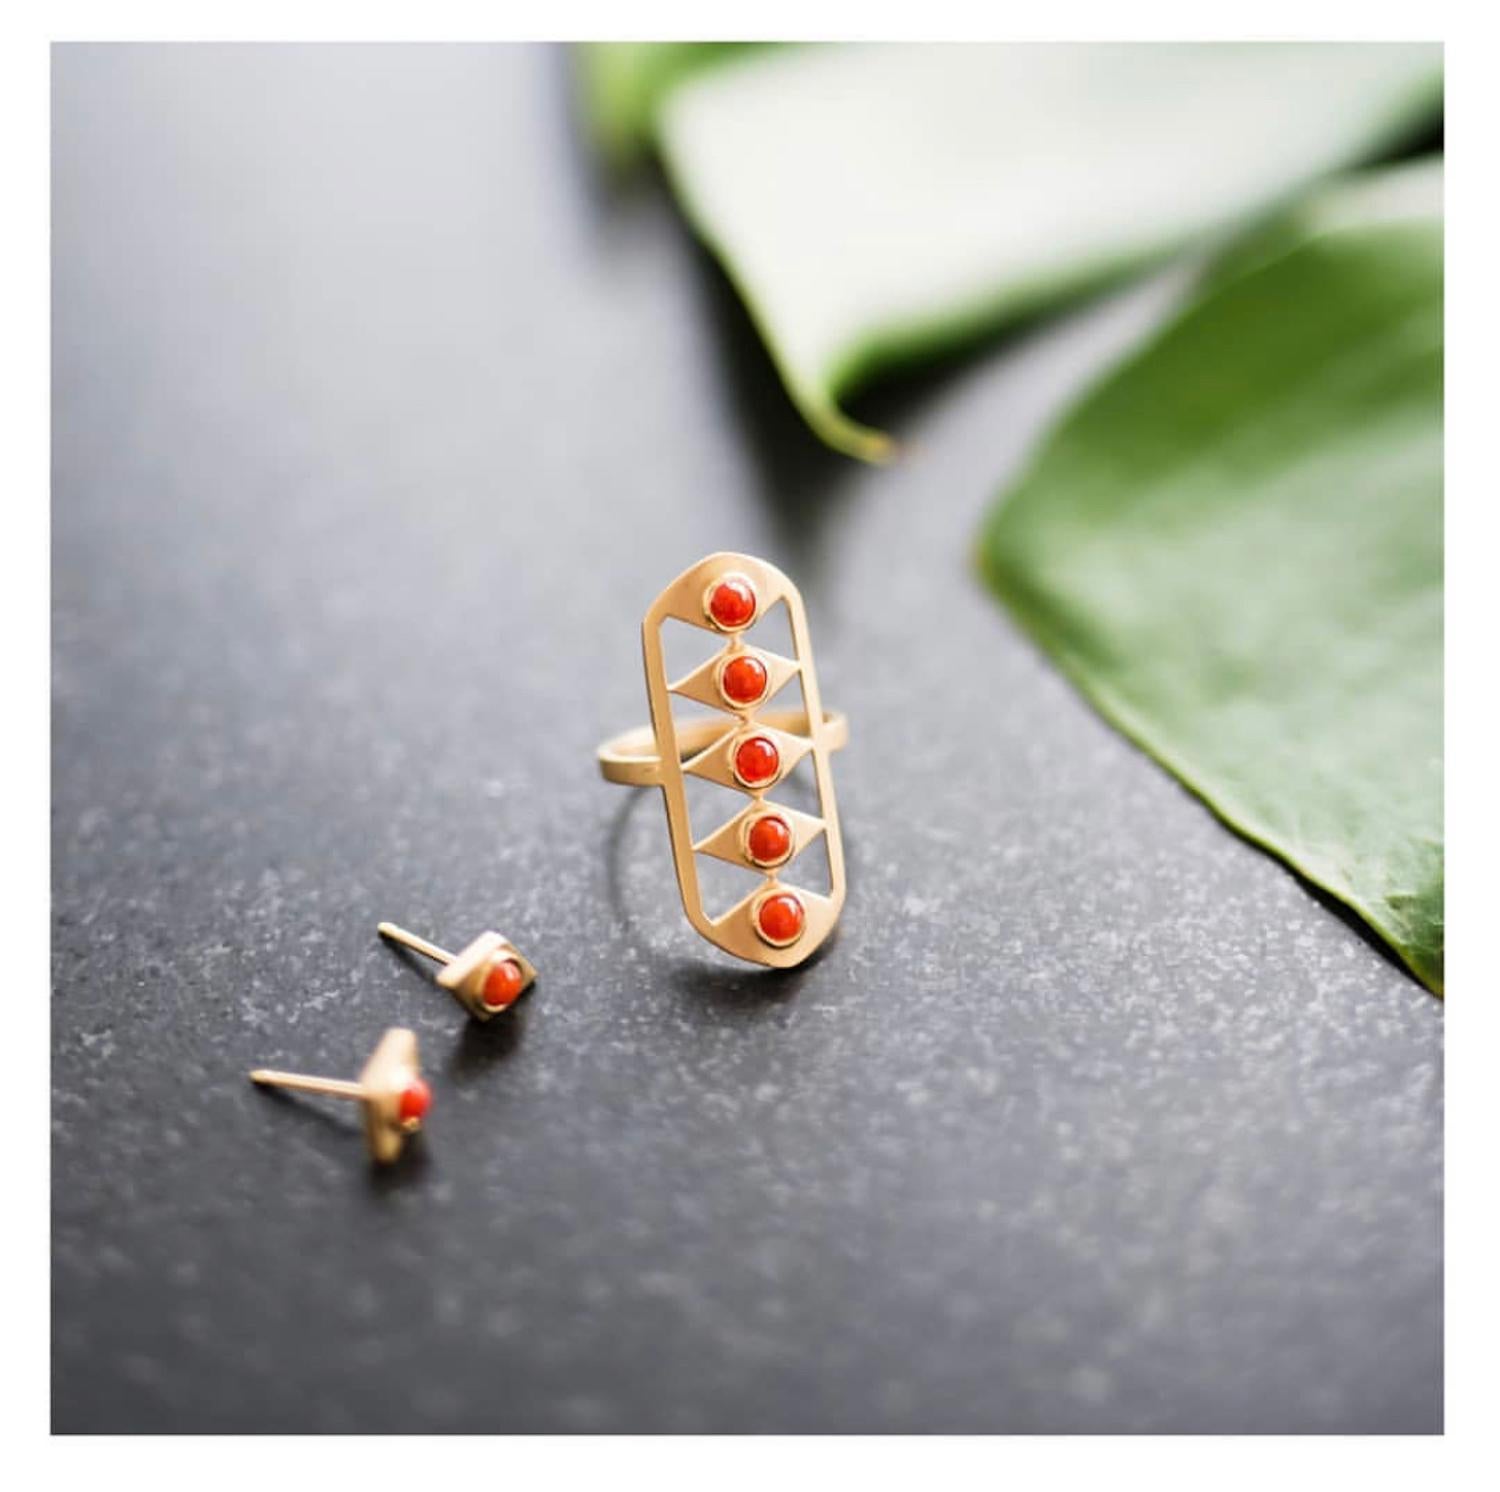 The Kite stud earrings, by Doryn Wallach, feature antique red coral, in 18K yellow gold with satin finish.  They add a subtle pop of color and Art Deco styling to any look. 

The price shown is reduced by 40% from the original.